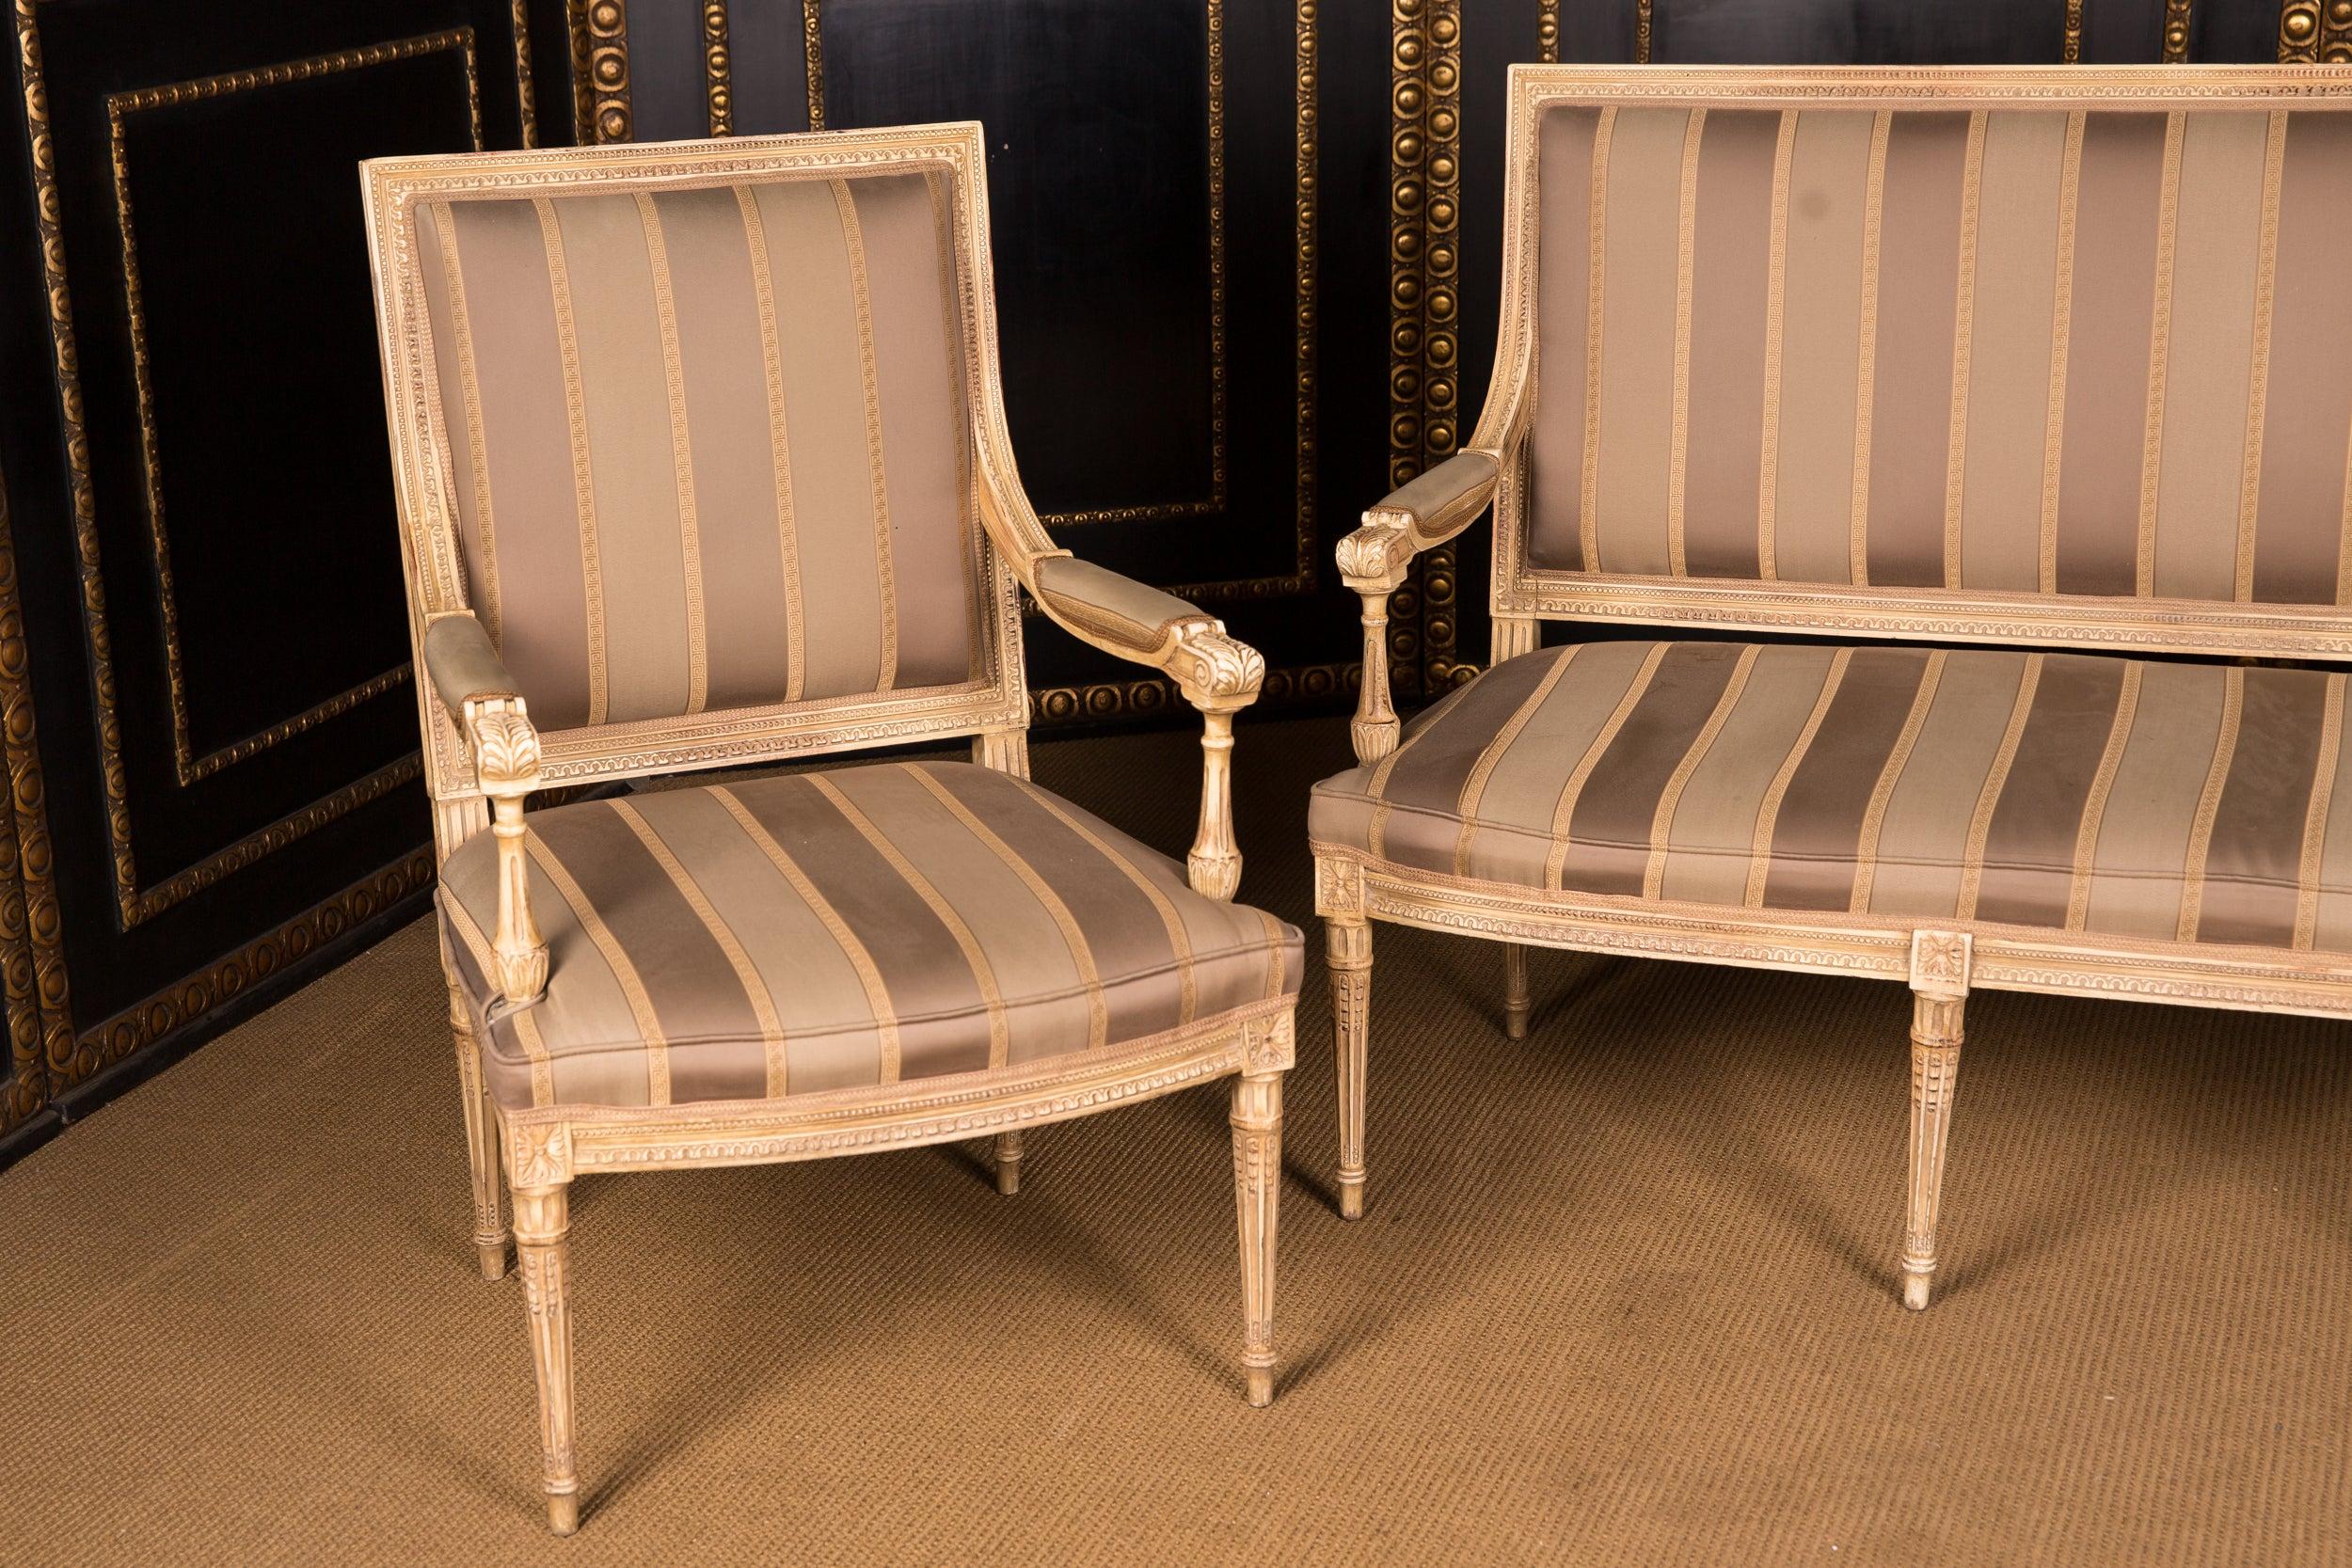 Louis XVI High Quality Seating Furniture, Sofa  and Two Armchairs in the Louis Seize Style